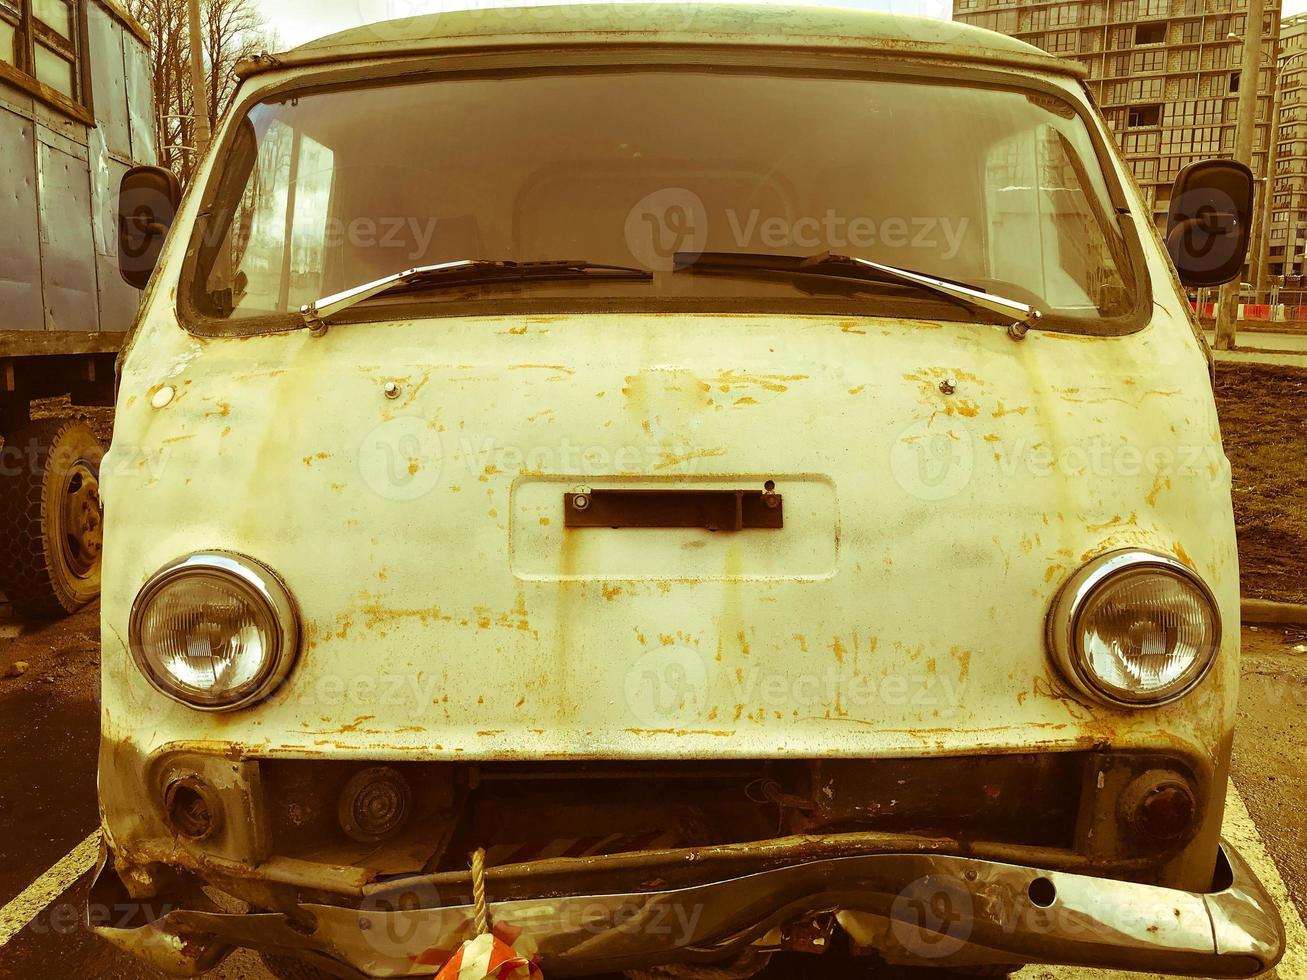 Old retro vintage hipster rusty oxidized metal round car minibus for hippies from the 60s, 70s, 80s, 90s, 2000s photo